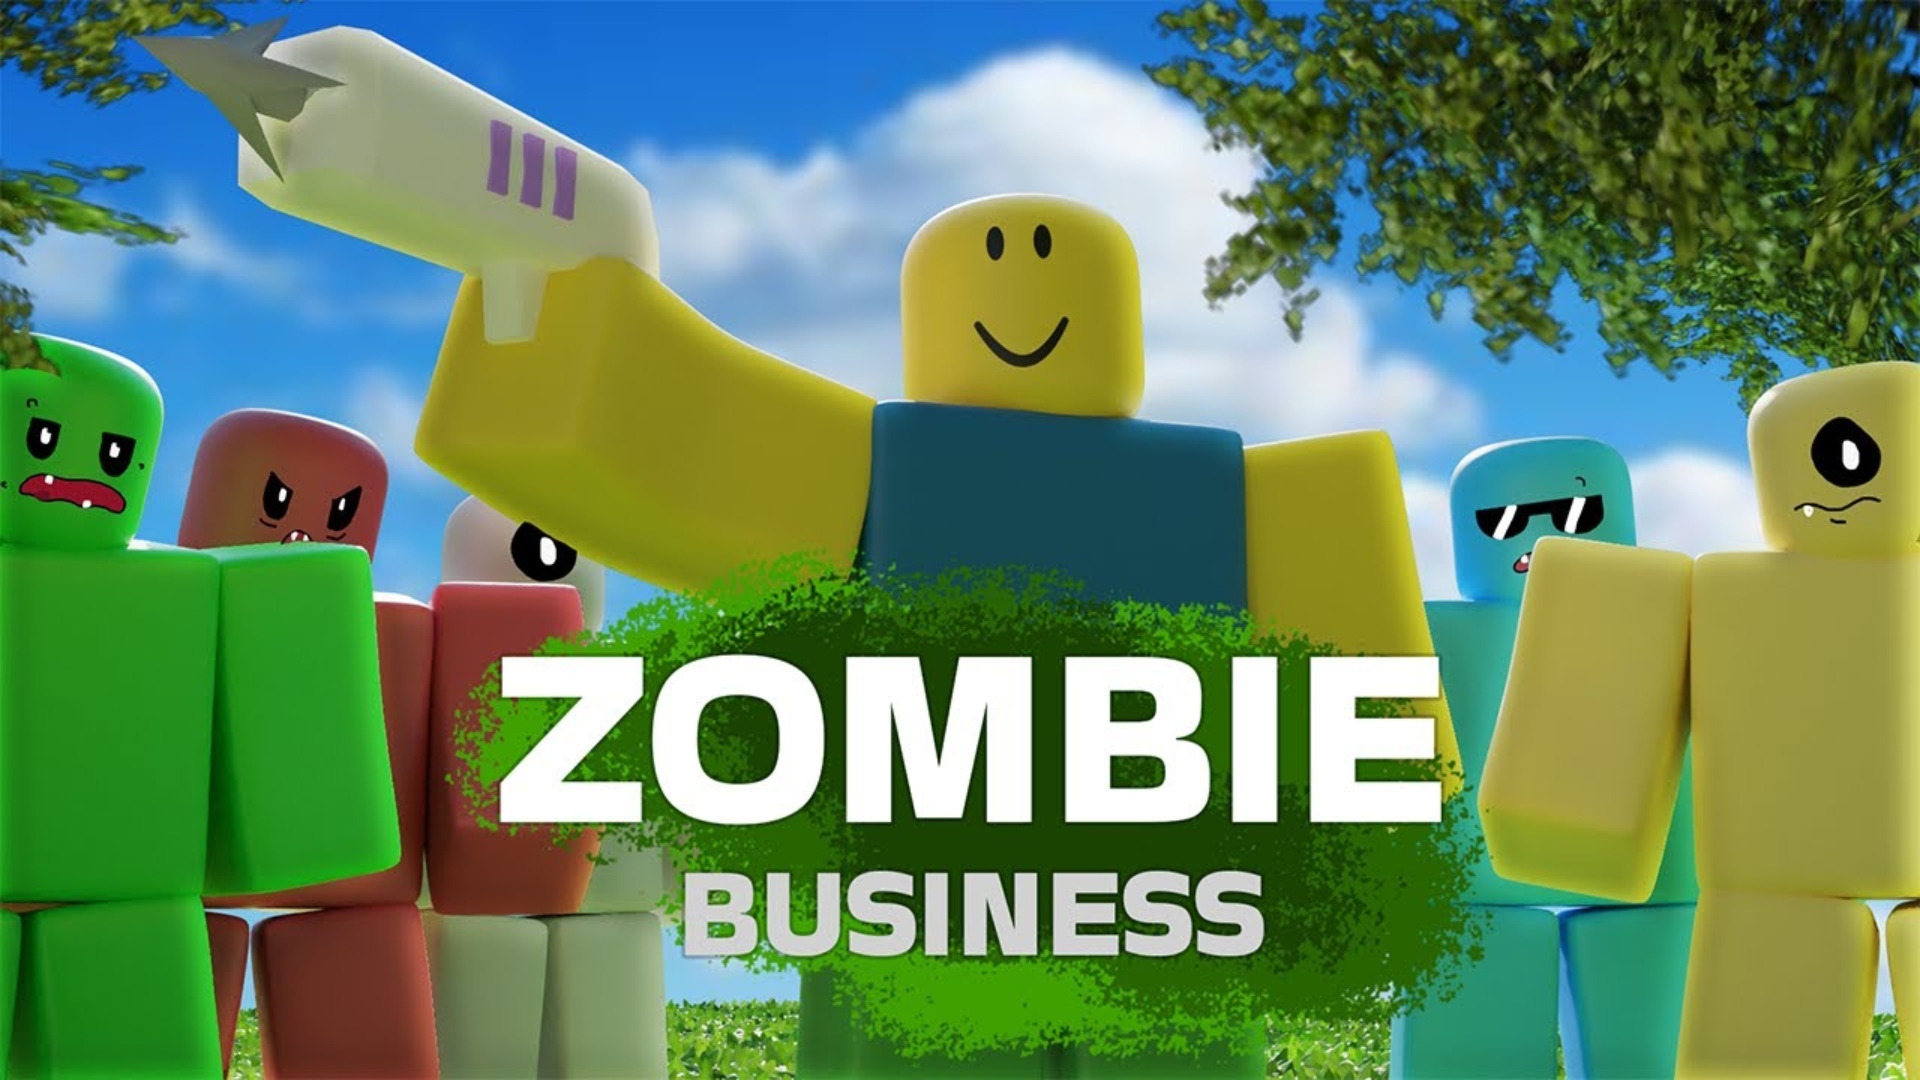 Characters from Zombie Business Tycoon.